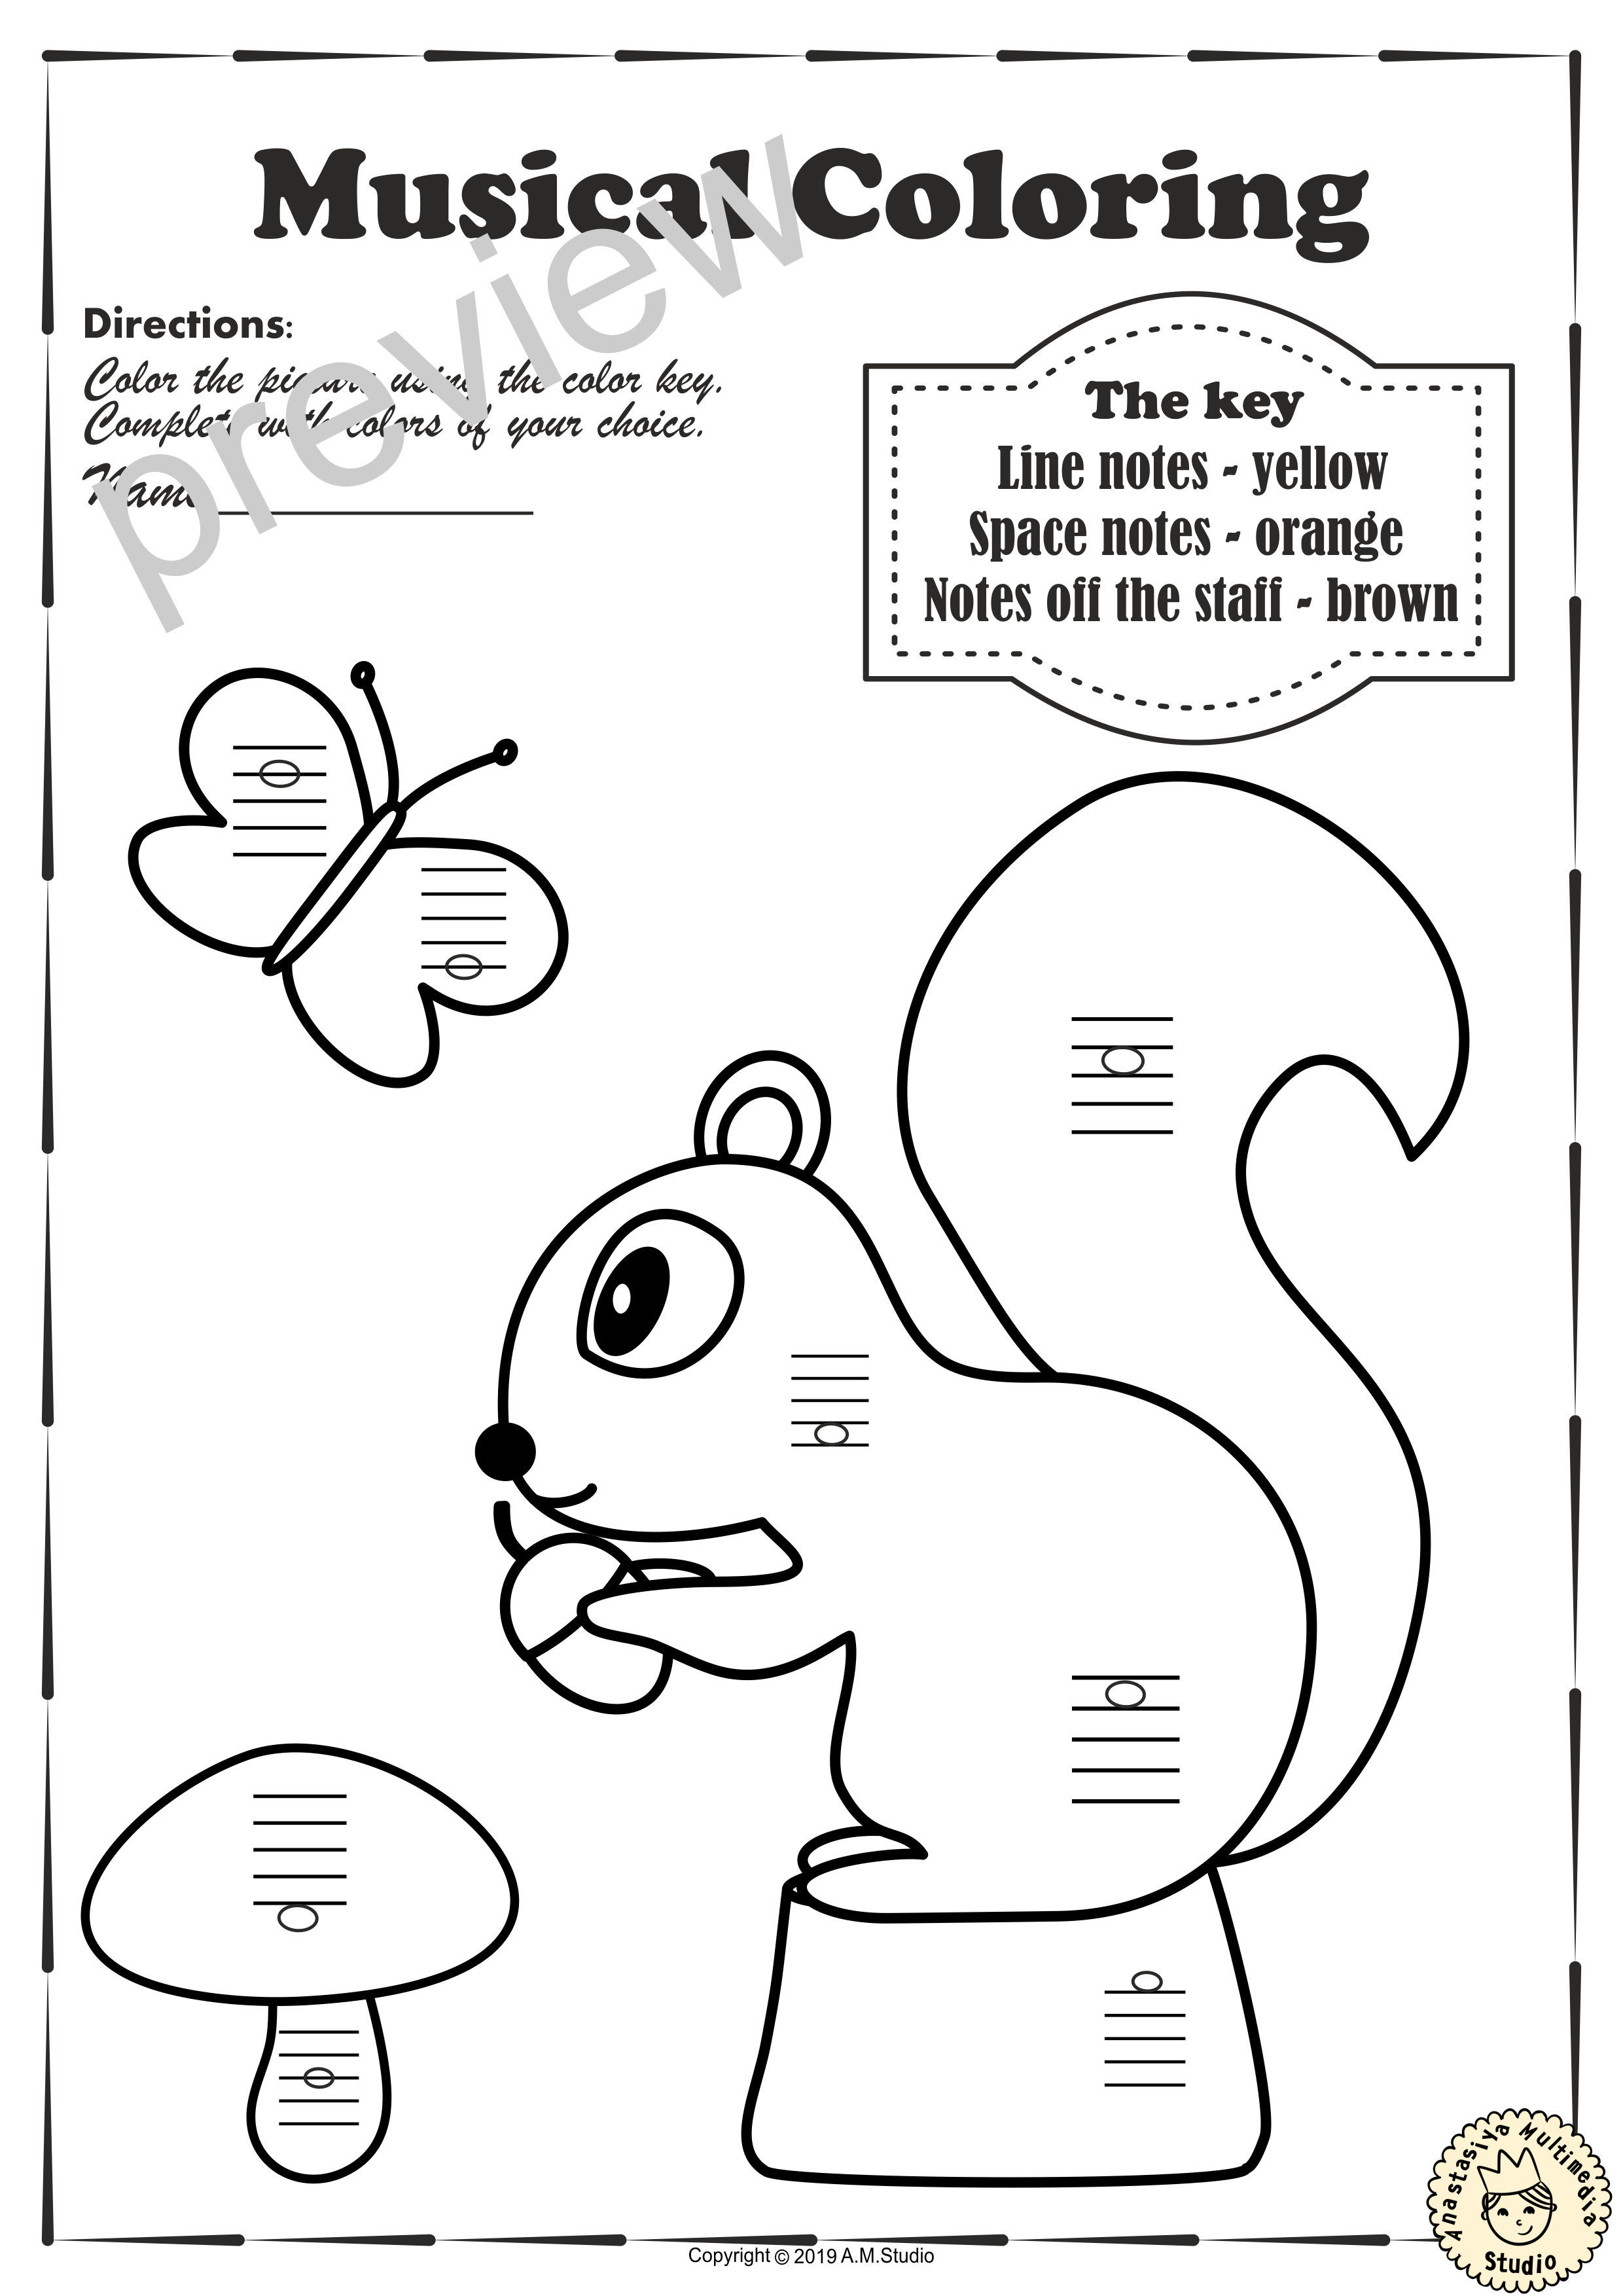 Musical Coloring Pages for Fall {Lines and Spaces} with answers (img # 2)